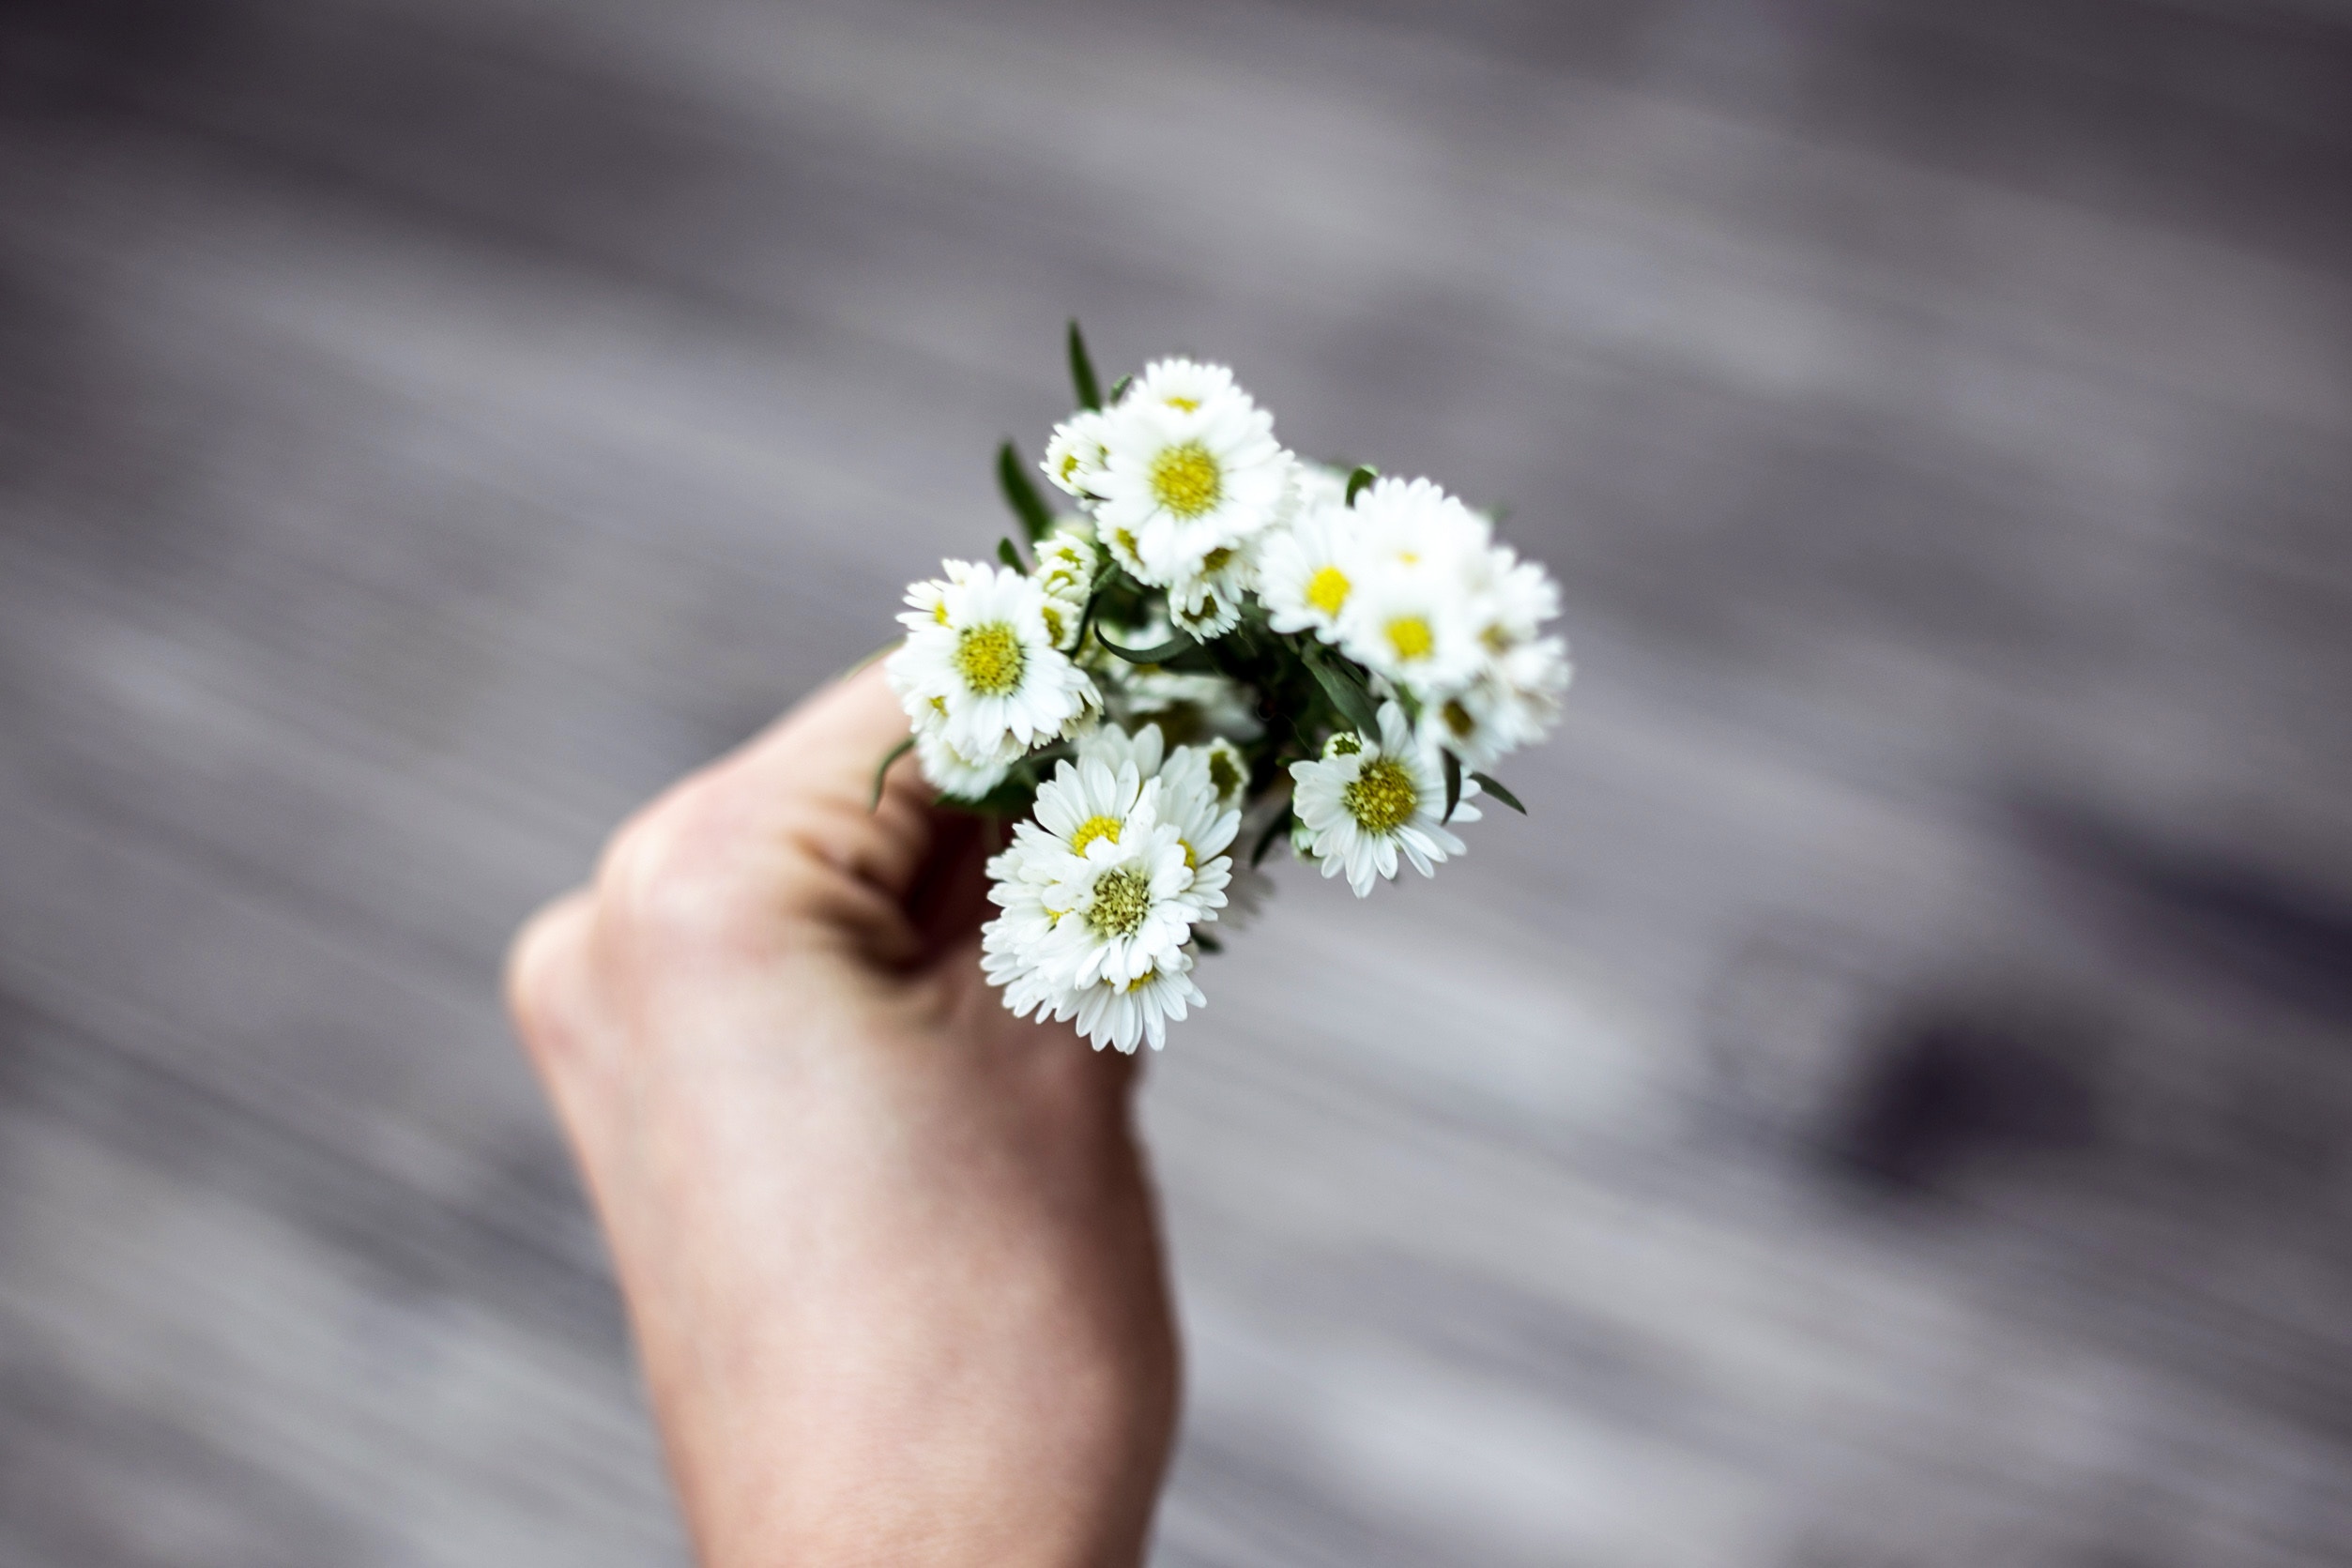 How making a choice too have positive personal interactions like giving white flowers.